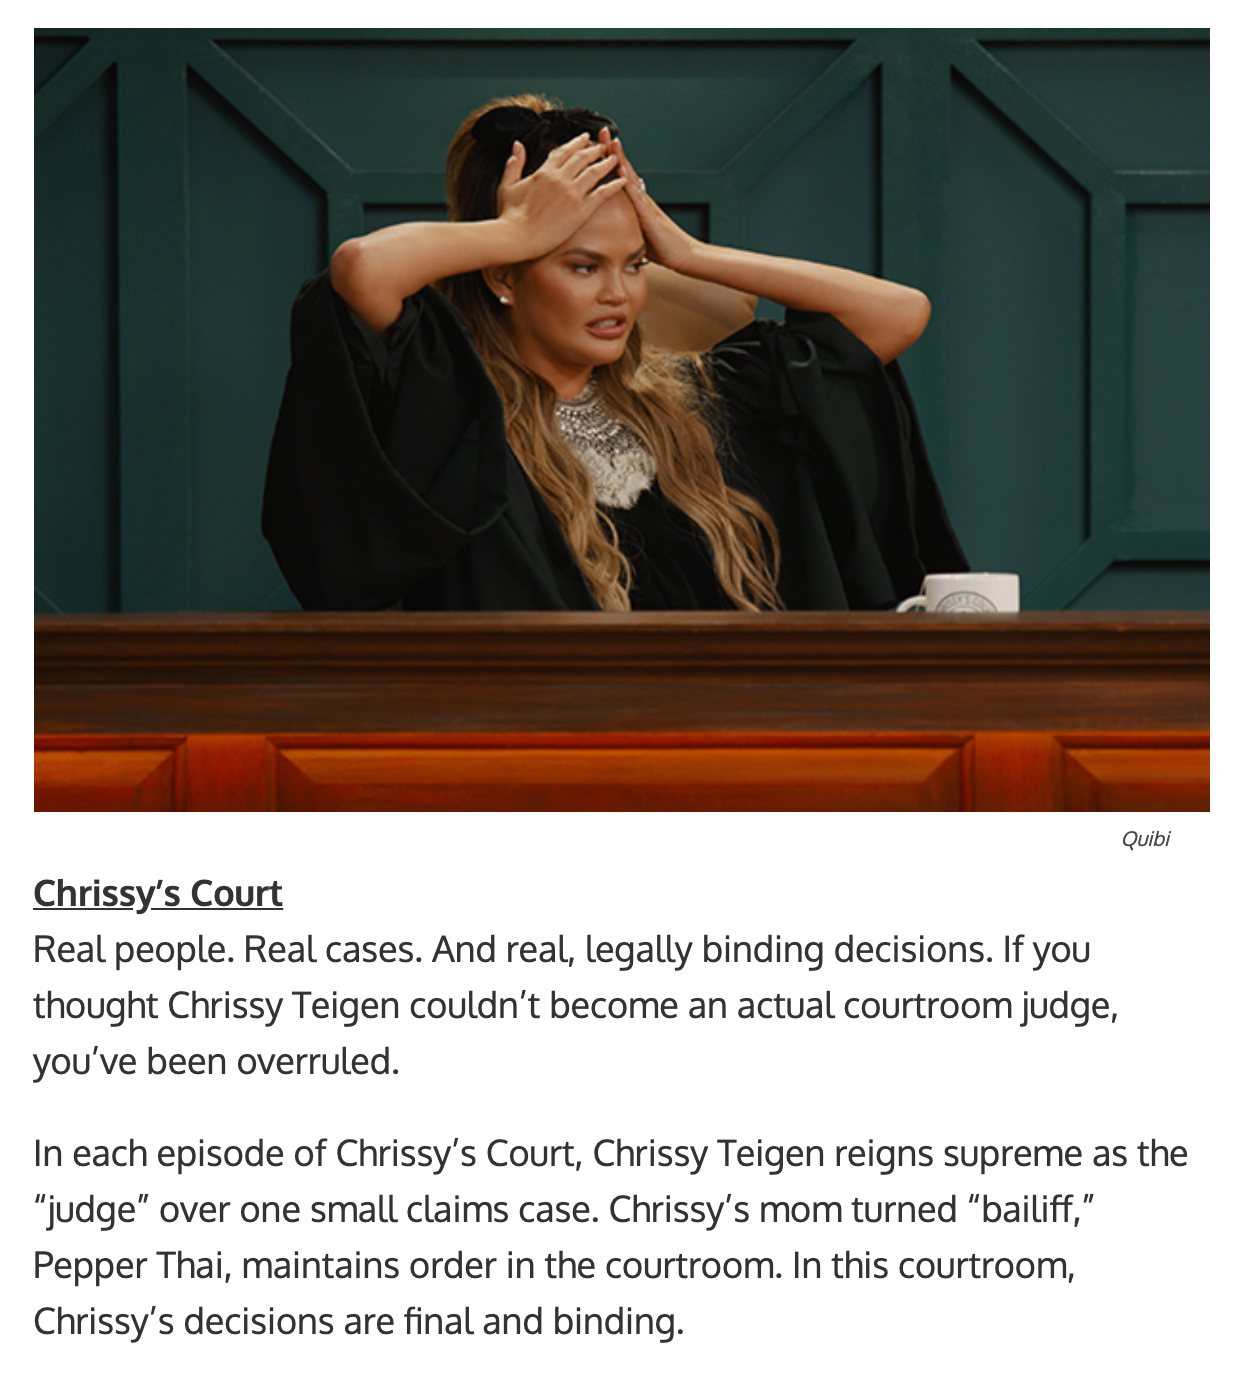 quibi show titles - Real people. Real cases. And real, legally binding decisions. If you thought Chrissy Teigen couldn’t become an actual courtroom judge, you’ve been overruled.  In each episode of Chrissy’s Court, Chrissy Teigen reigns supreme as the “ju